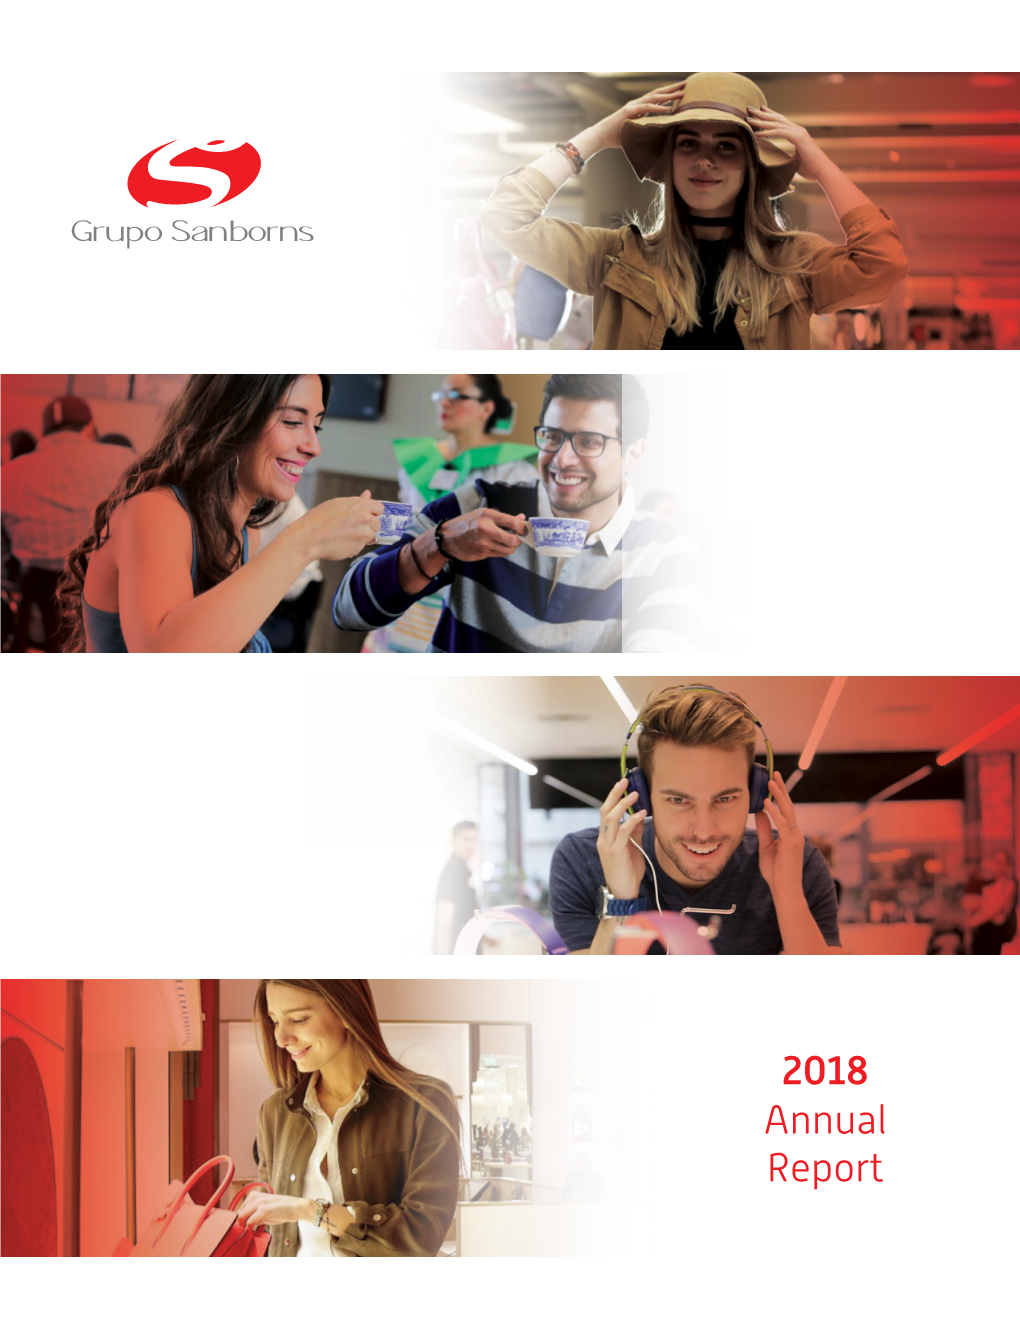 2018 Annual Report Corporate Profile Grupo Sanborns Is a Leader in the Mexican Retail Market